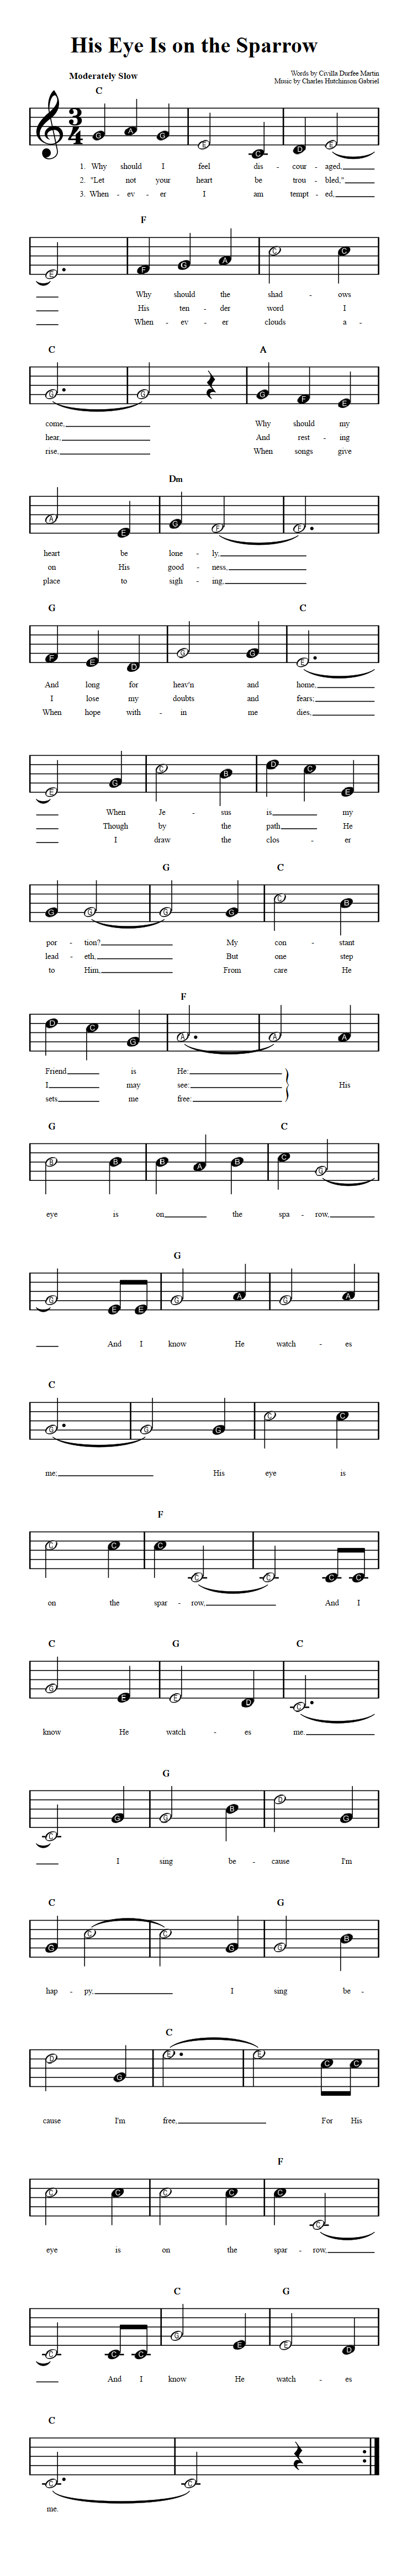 His Eye Is on the Sparrow  Beginner Sheet Music